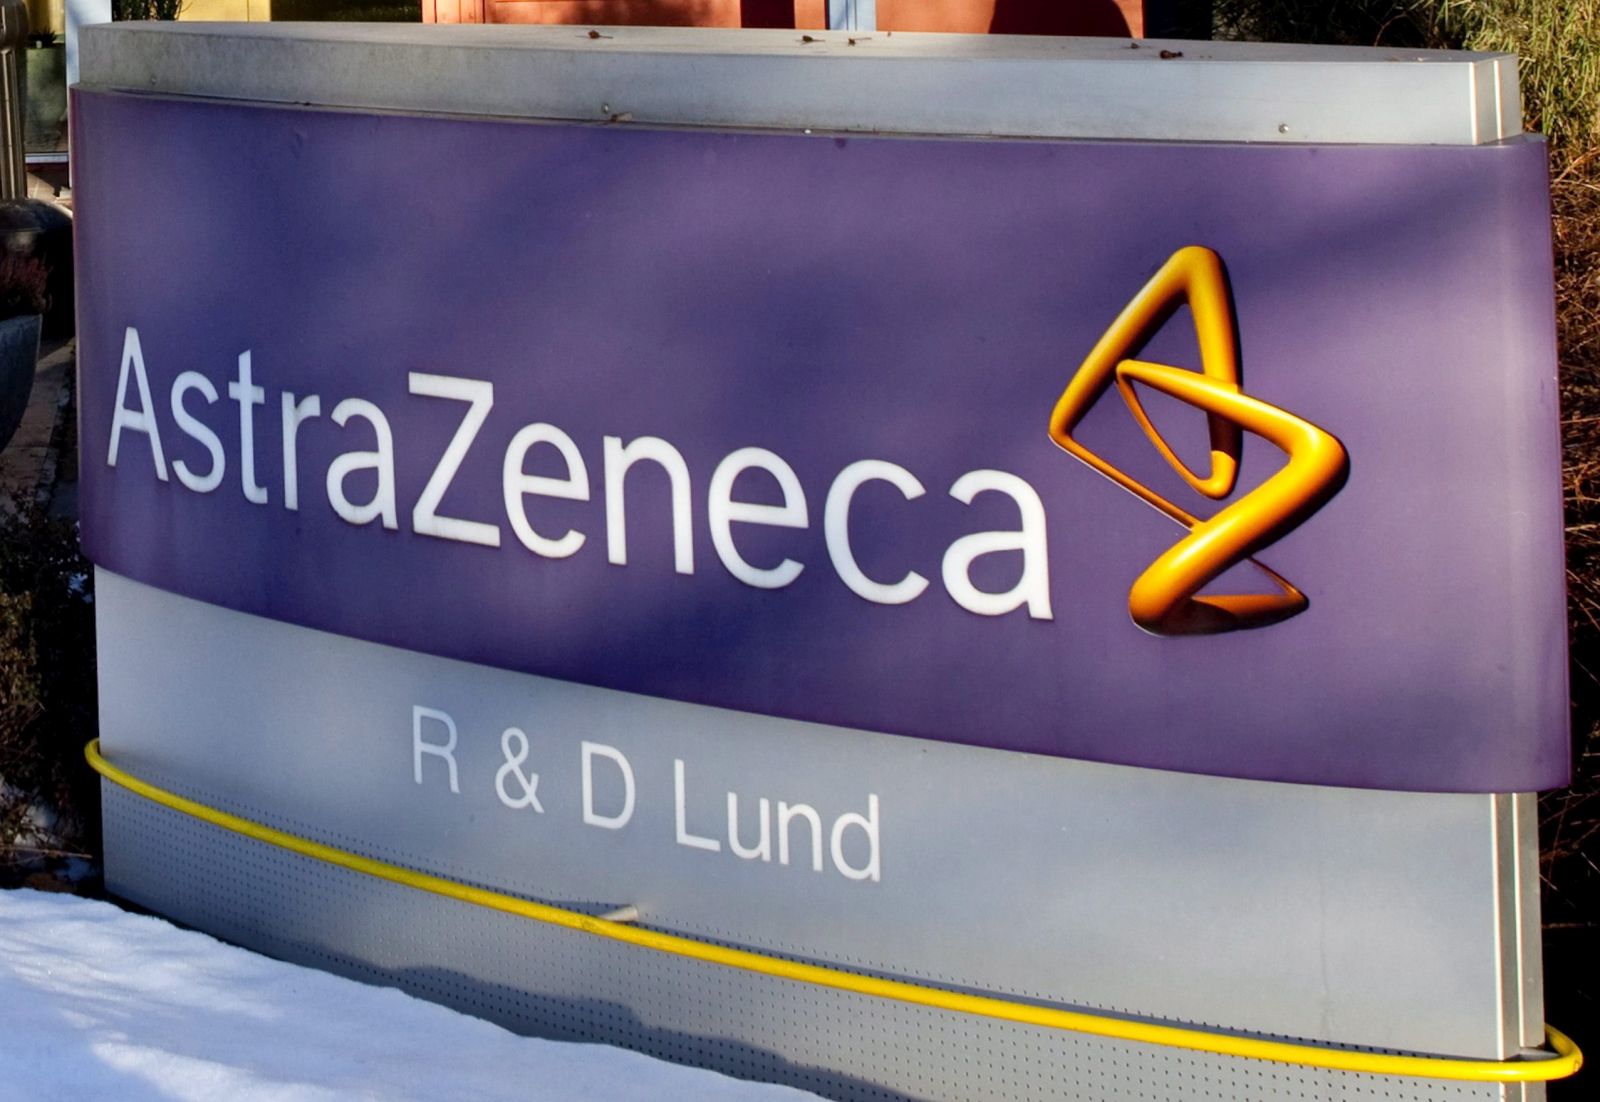 epa08959305 (FILE) - A file photo dated 02 March 2010 showing the company sign outside the Pharmaceutical company AstraZeneca research and development plant in Lund, Sweden (reissued 23 January 2021). Media reports on 23 January 2021 state  AstraZeneca, that was to deliver some 80 million doses of its vaccine starting in March 2021 to European countries, has said it would cut its Covid-19 vaccine deliveries by 60 per cent, or 31 million doses, in the 1st quarter 2021. AstraZeneca cited production problems as reason for the delivery issues.  EPA/DRAGO PRVULOVIC SWEDEN OUT *** Local Caption *** 53679653